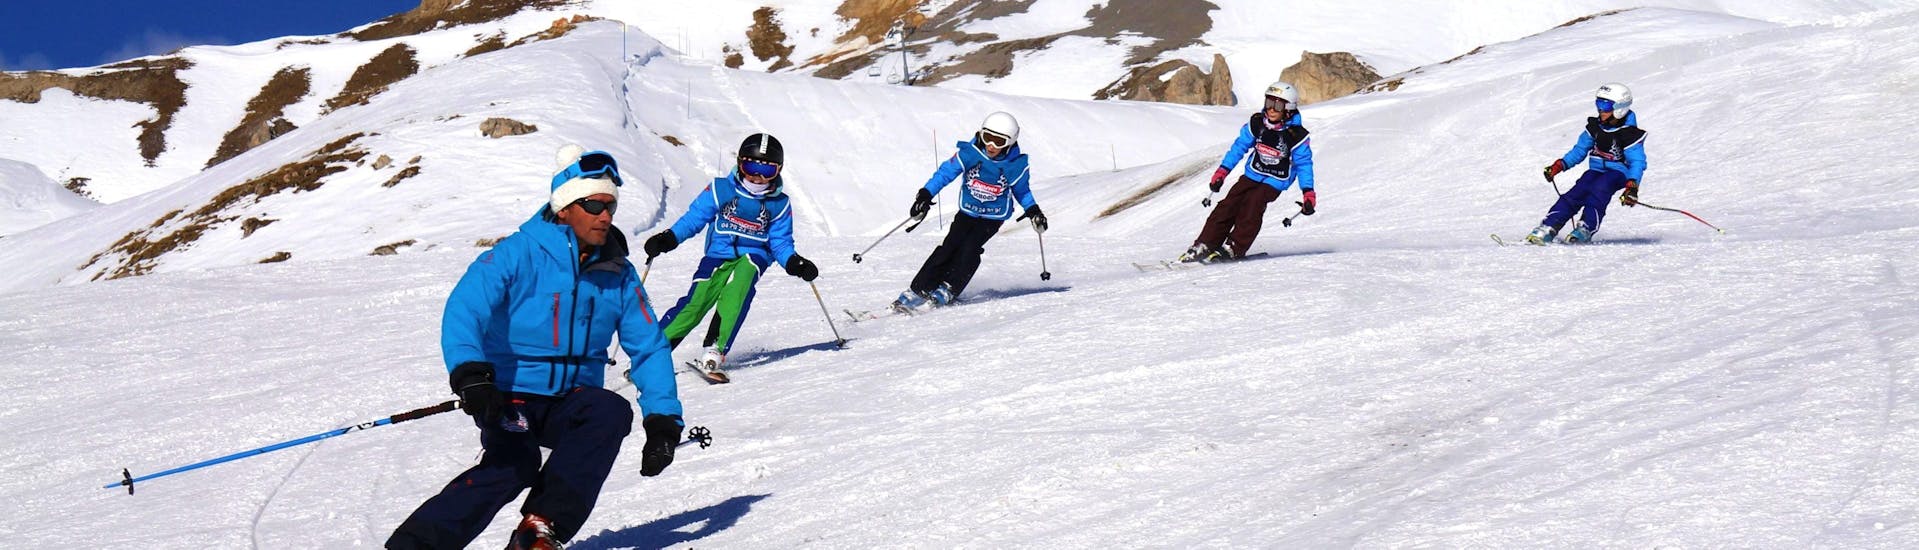 Young skiers are following their instructor from the ski school Snocool Tignes on a snowy slope during their Kids Ski Lessons "Pop 6" (10-17 years) - Advanced. 